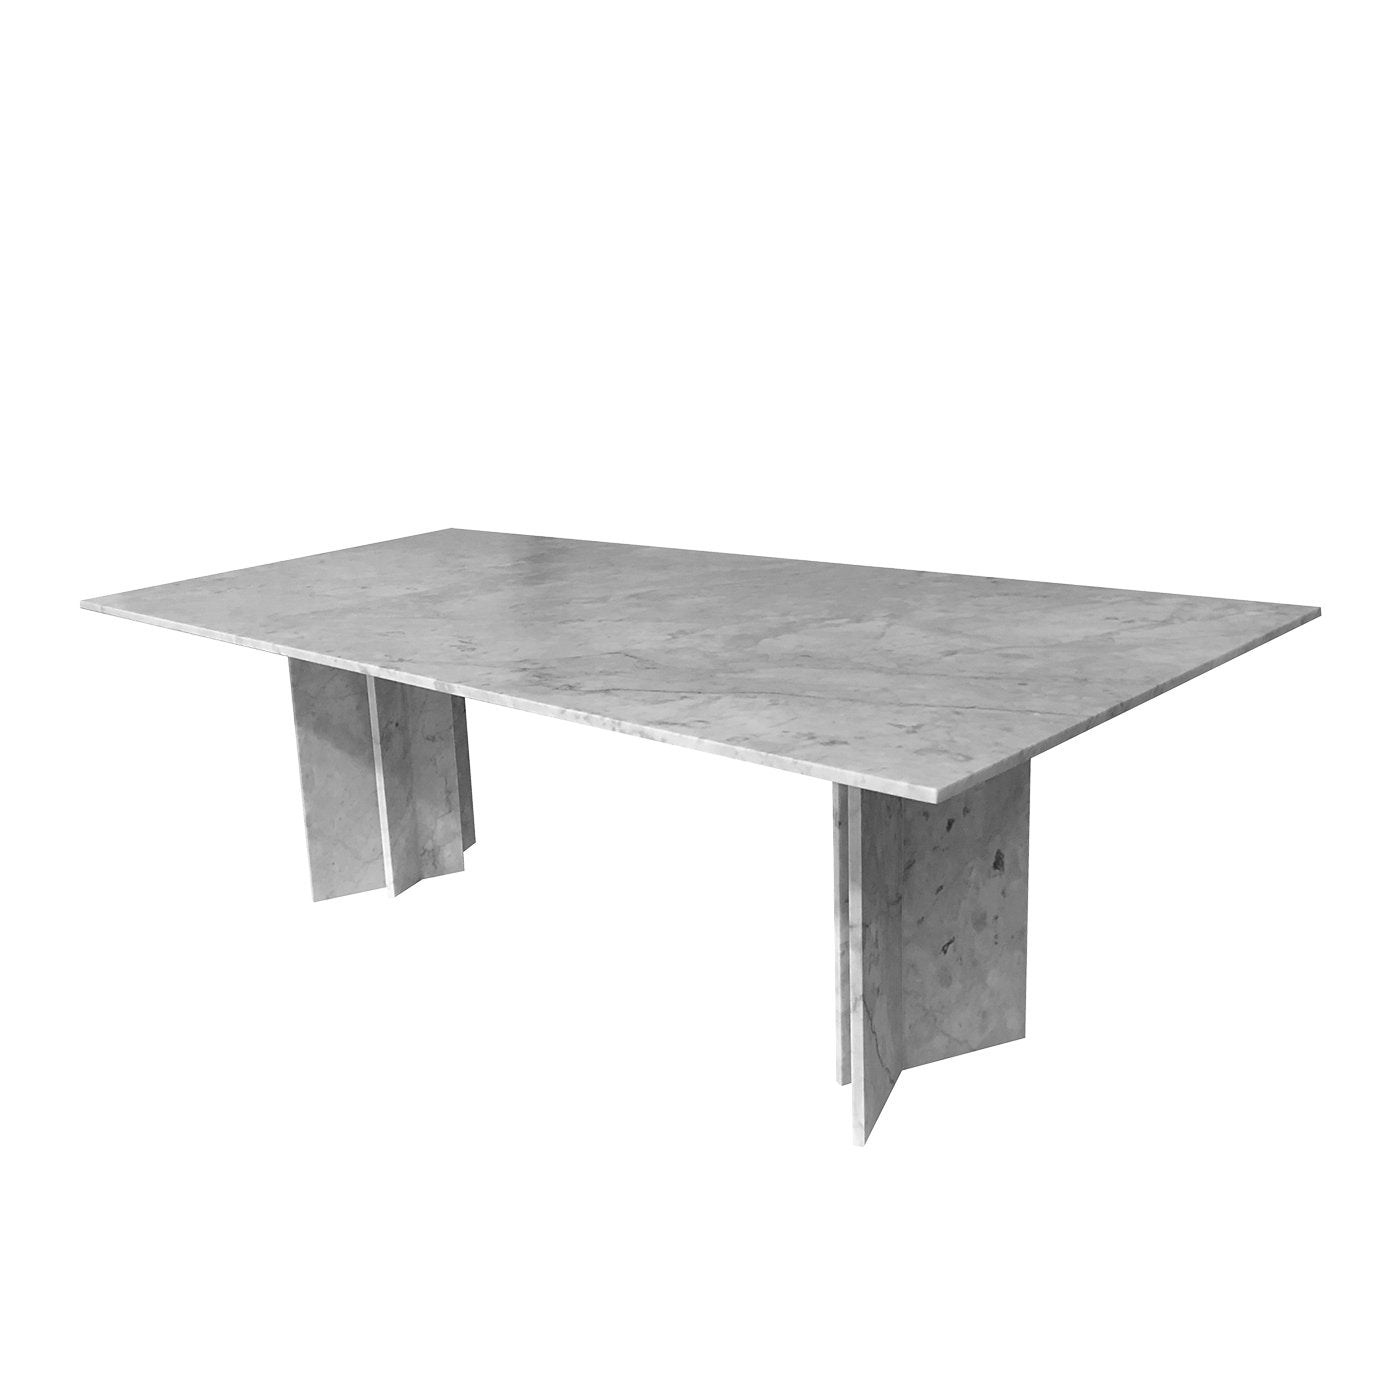 Rectangular Terry Table in White Marble - Alternative view 1